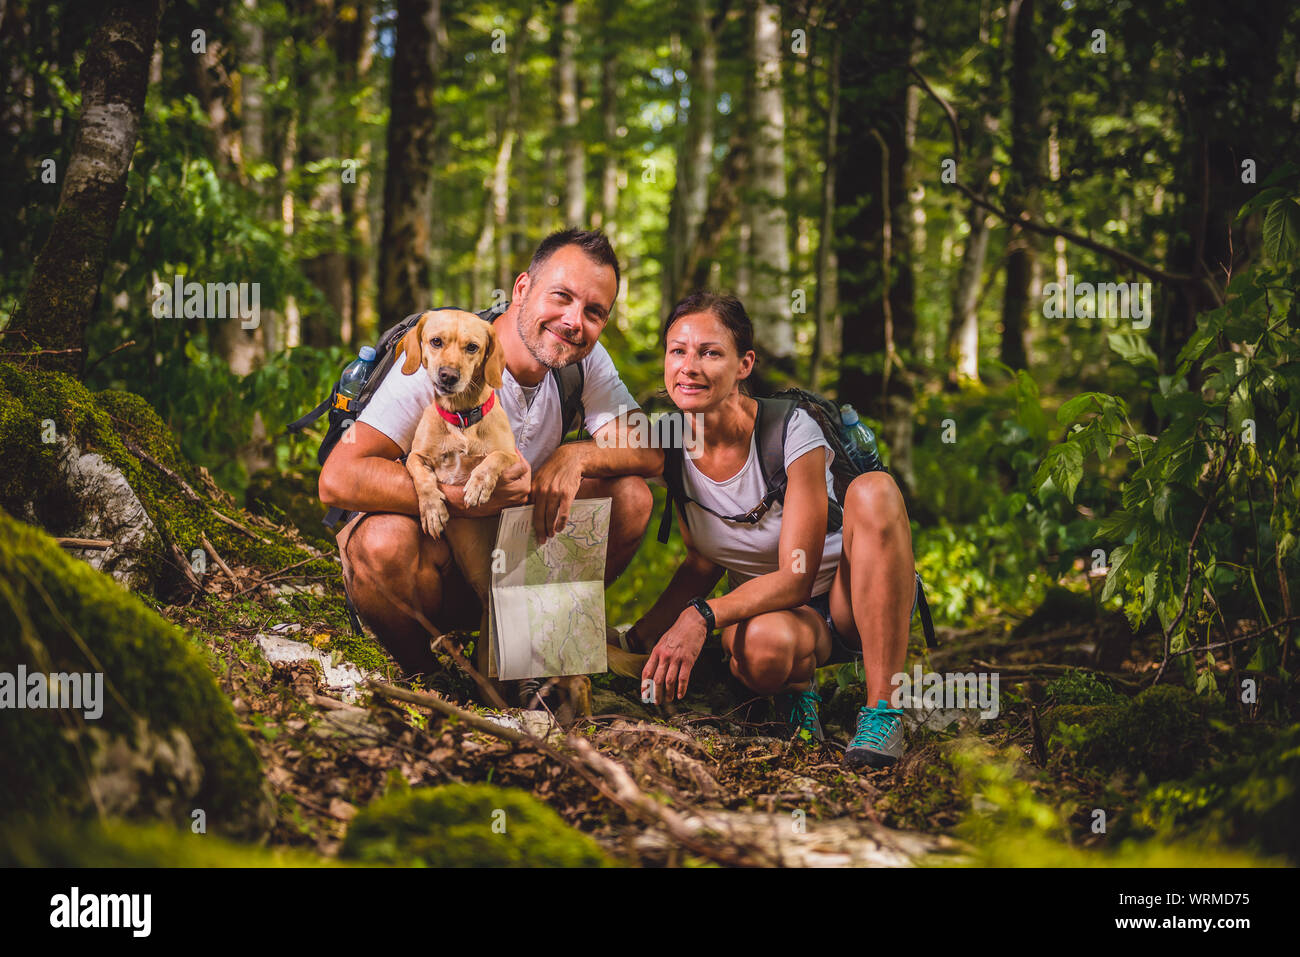 Hiking couple with small yellow dog posing in forest Stock Photo